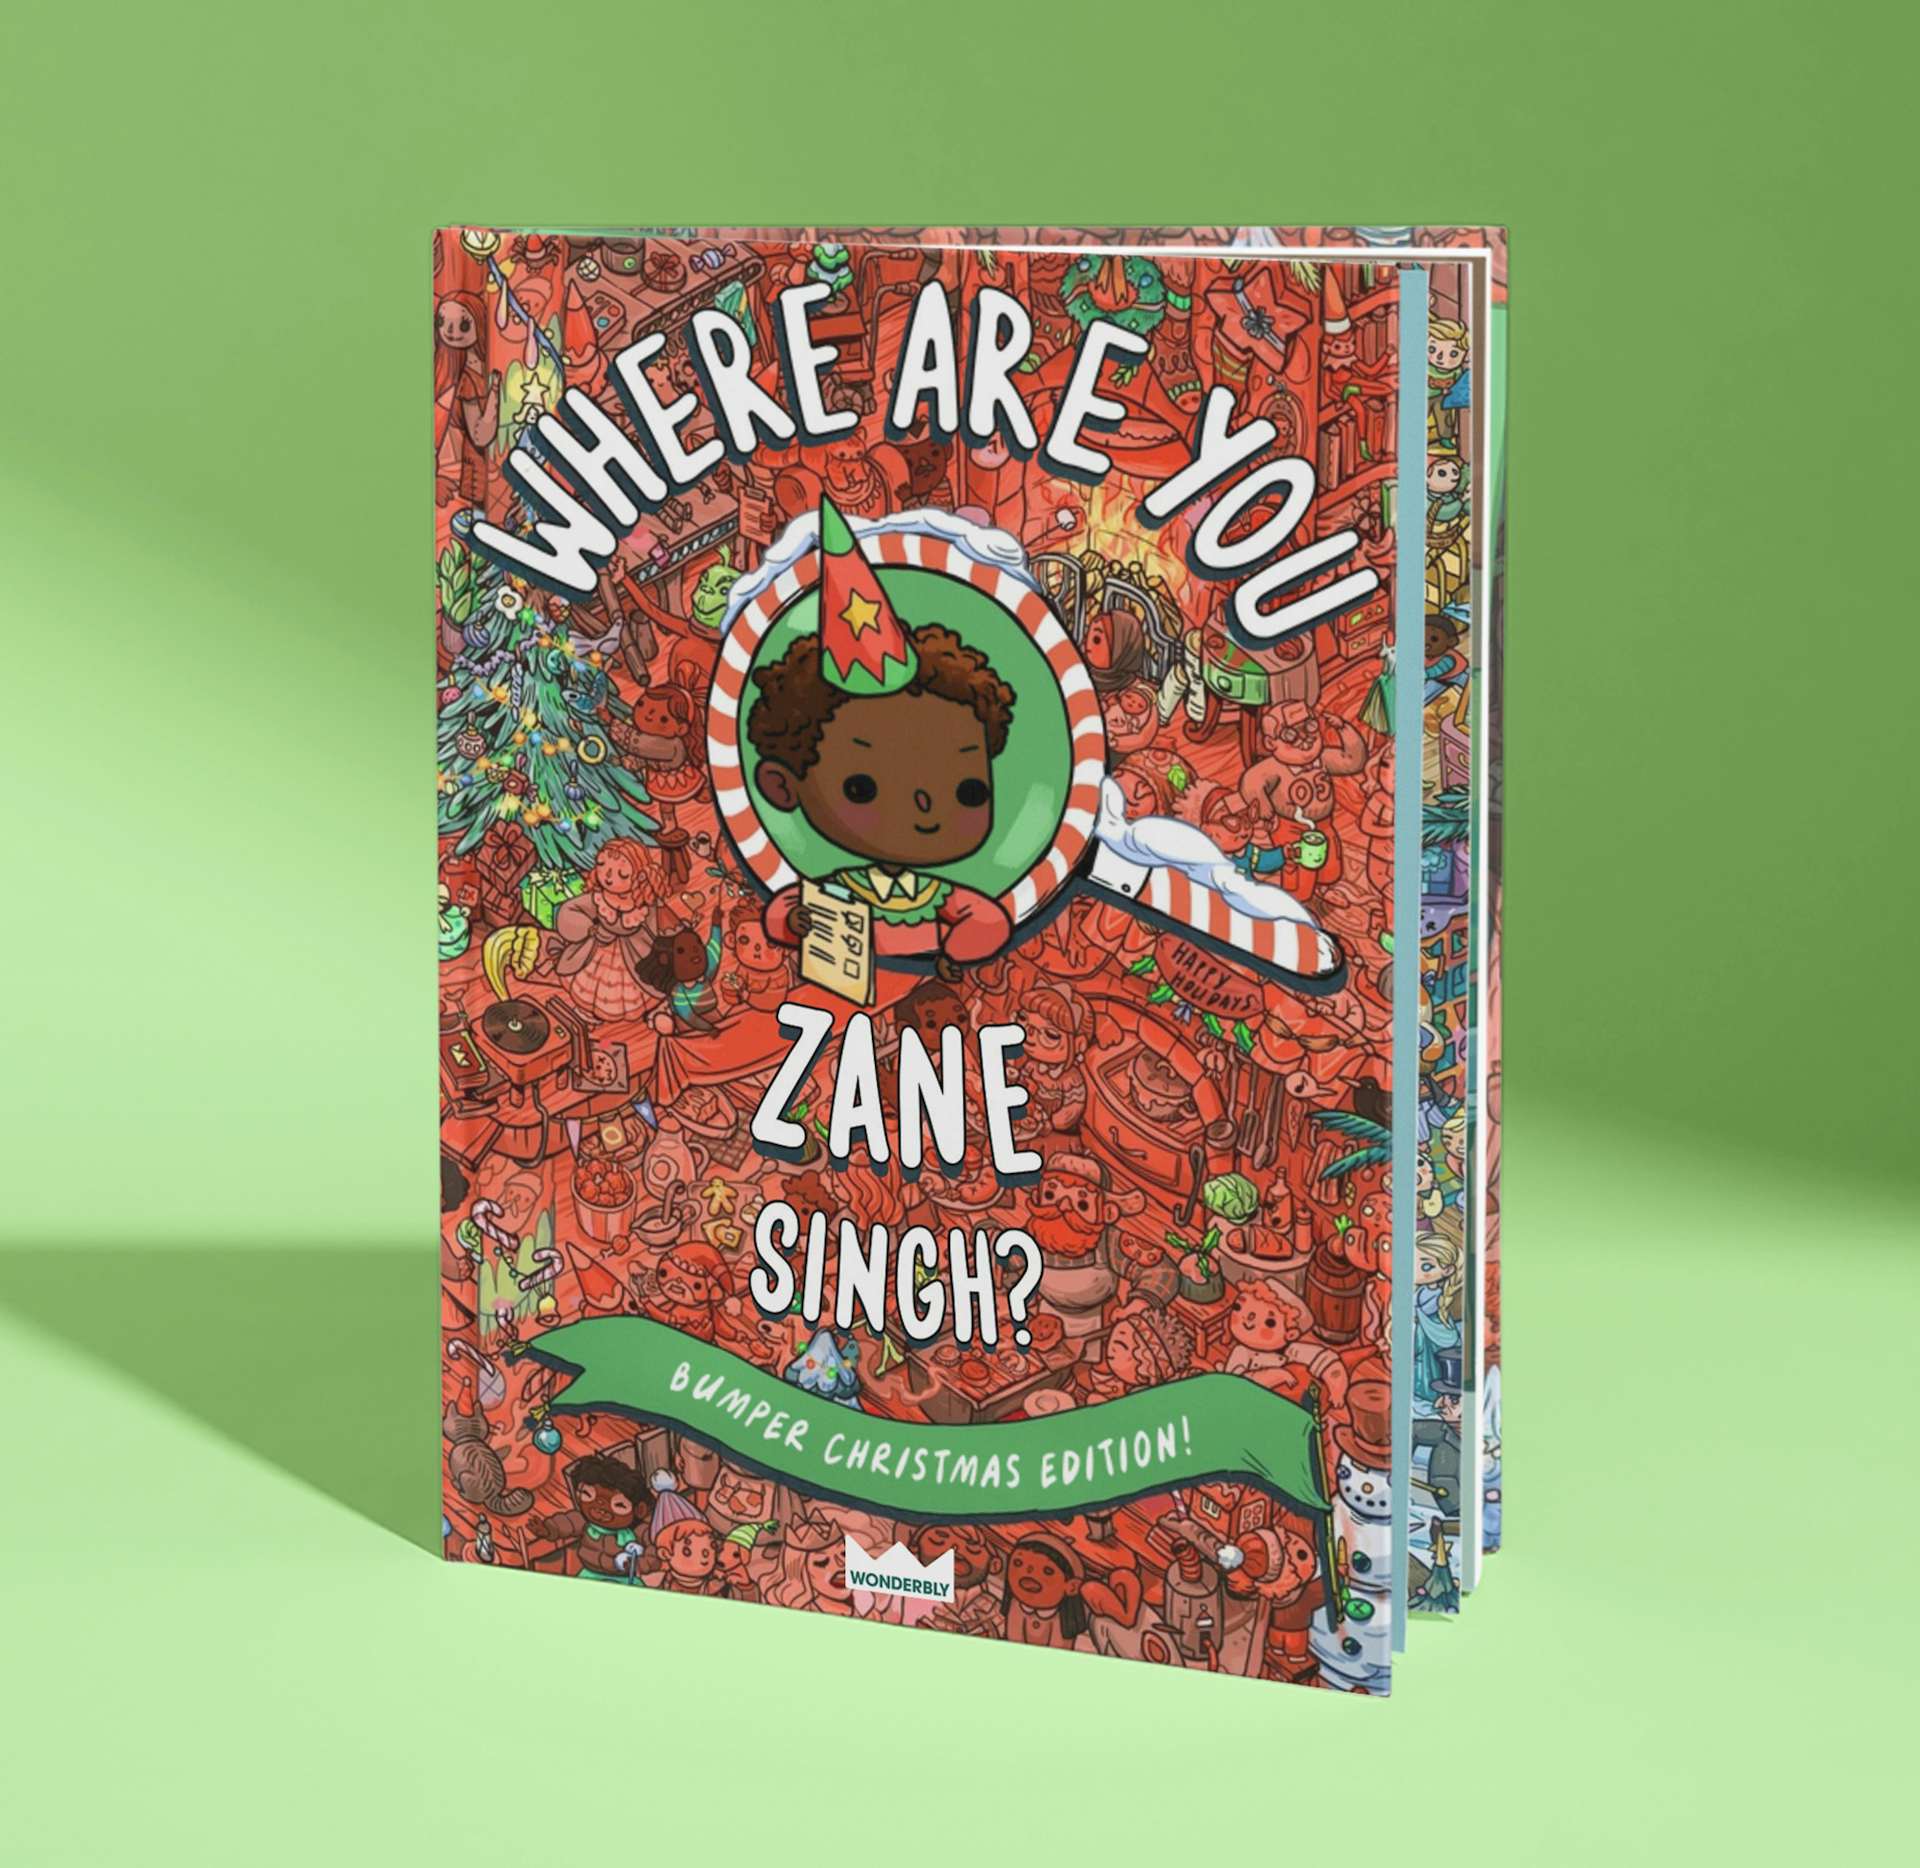 Book cover of Where Are You? Bumper Christmas Edition!